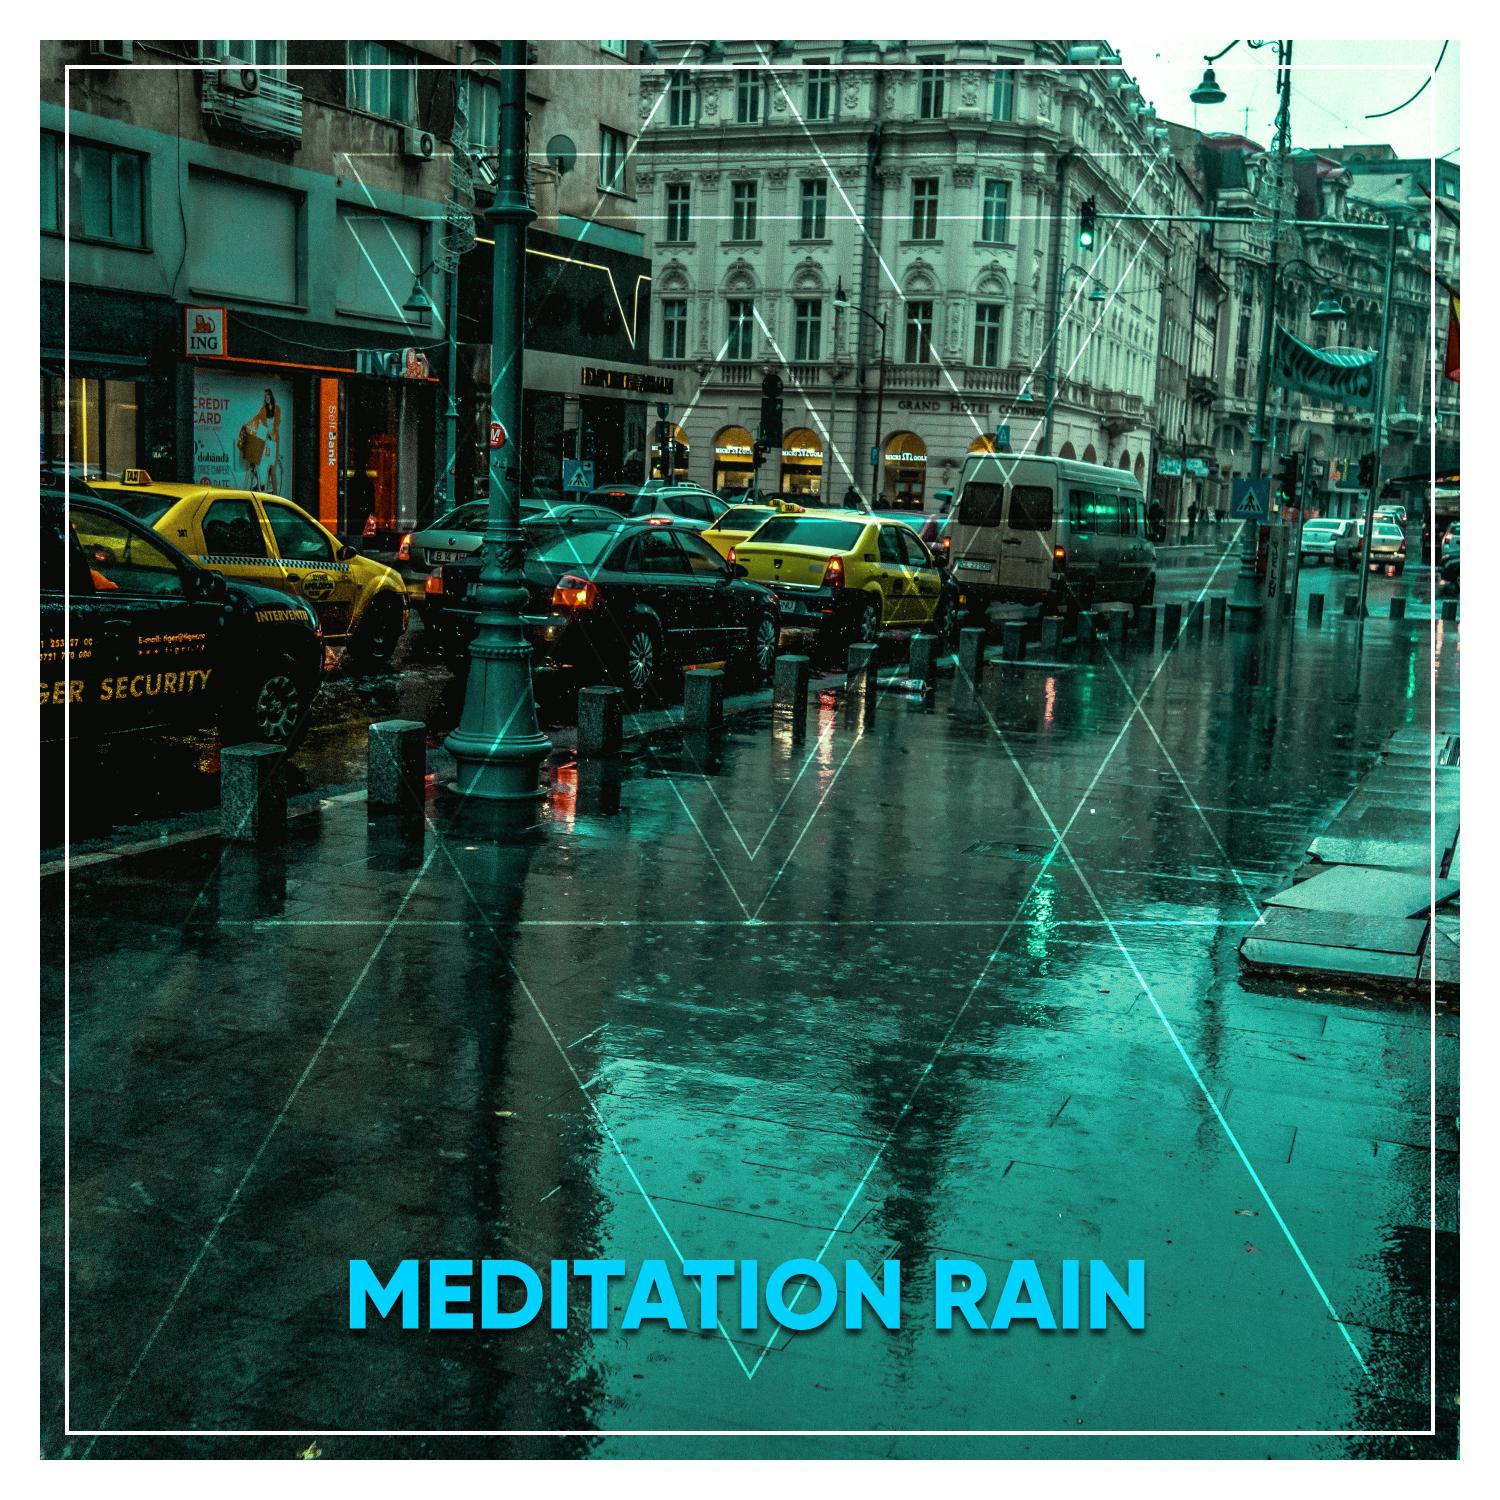 17 Meditation Rain Sounds for Ultimate Relaxation